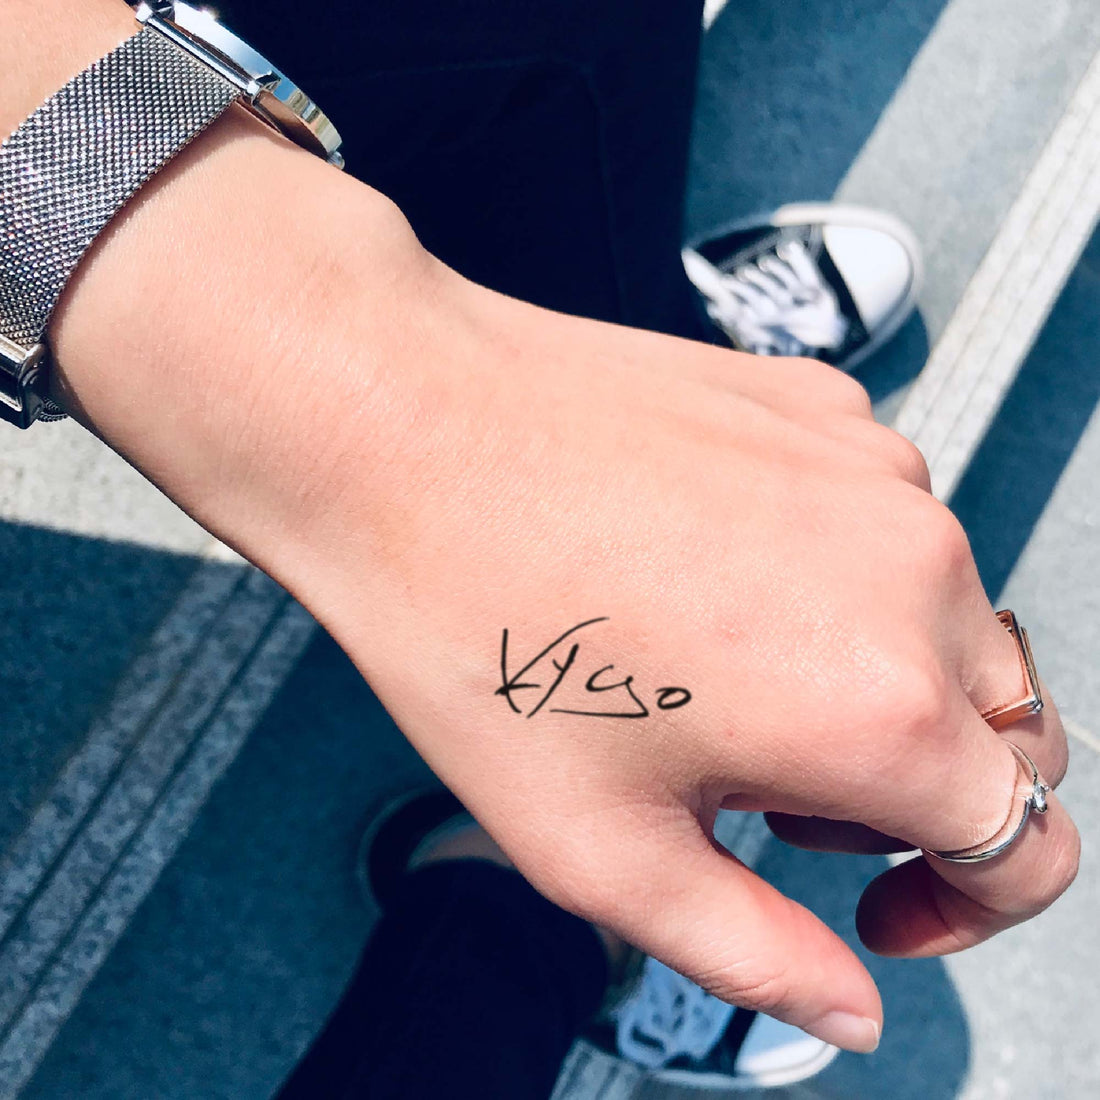 Kygo custom temporary tattoo sticker design idea inspiration meanings removal arm wrist hand words font name signature calligraphy lyrics tour concert outfits merch accessory gift souvenir costumes wear dress up code